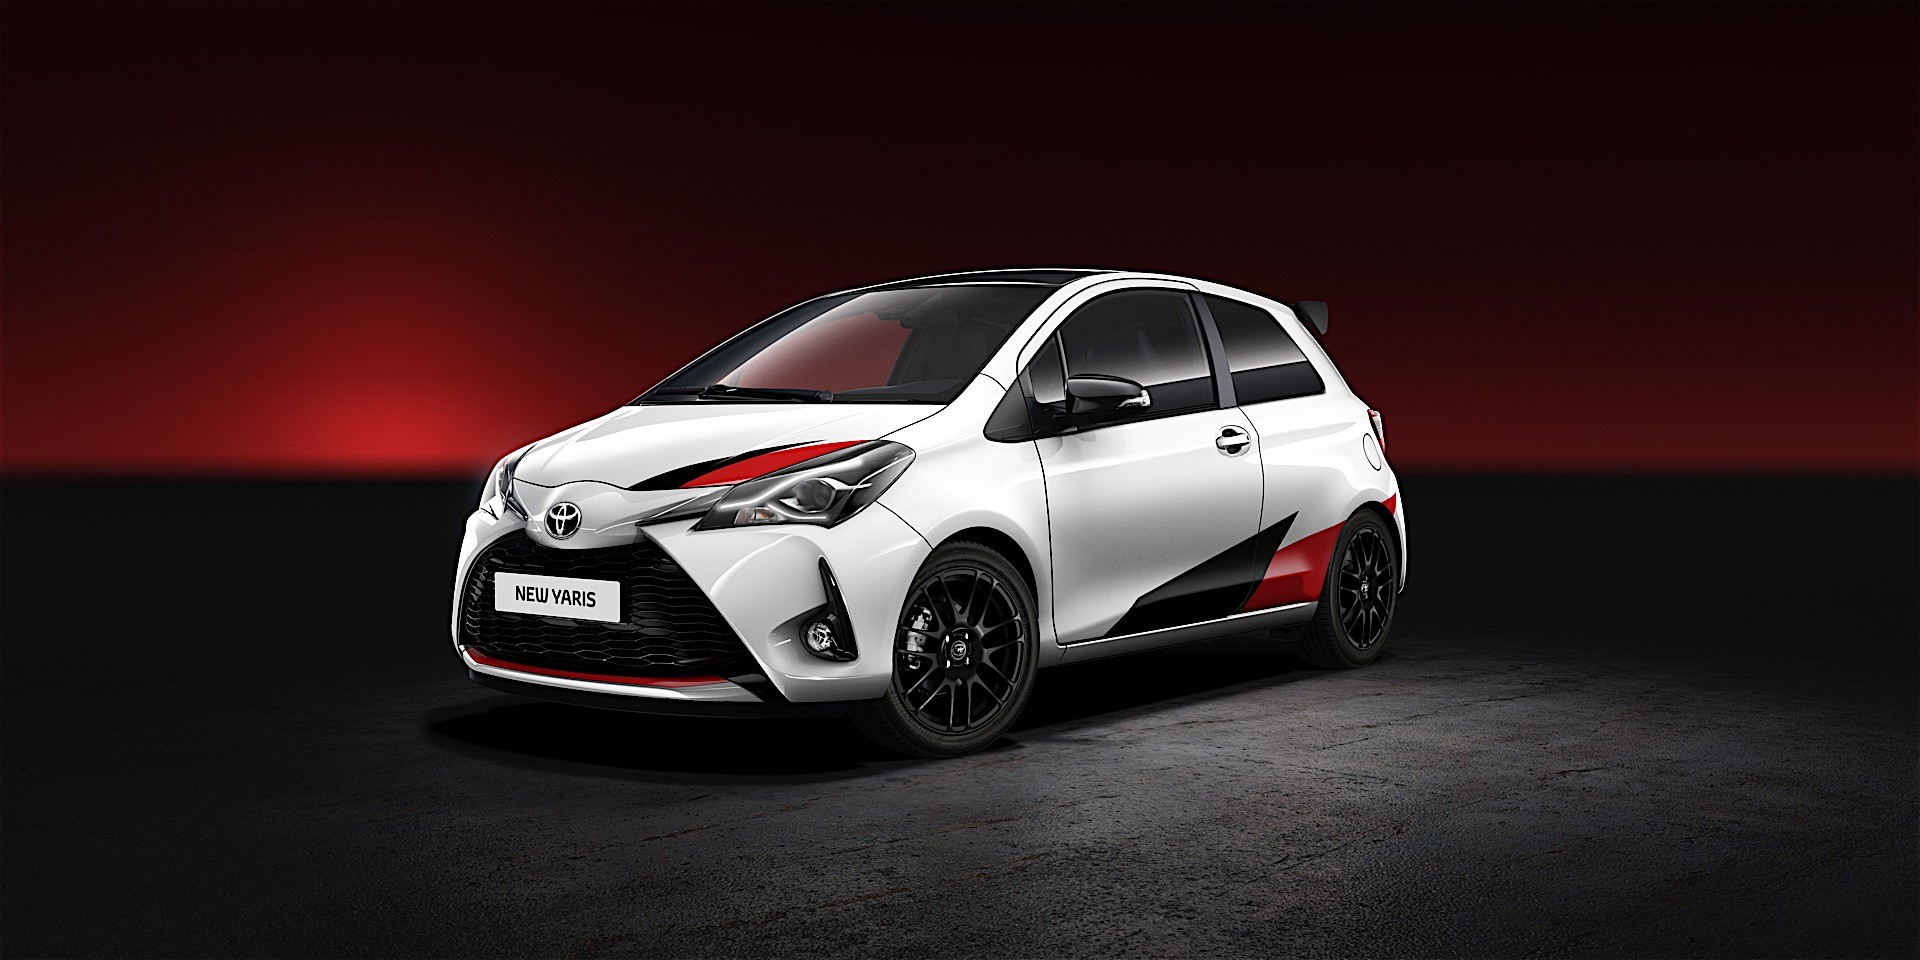 2017 Toyota Yaris To Be Offered With 1.5-liter ESTEC VVT-iE Engine ...